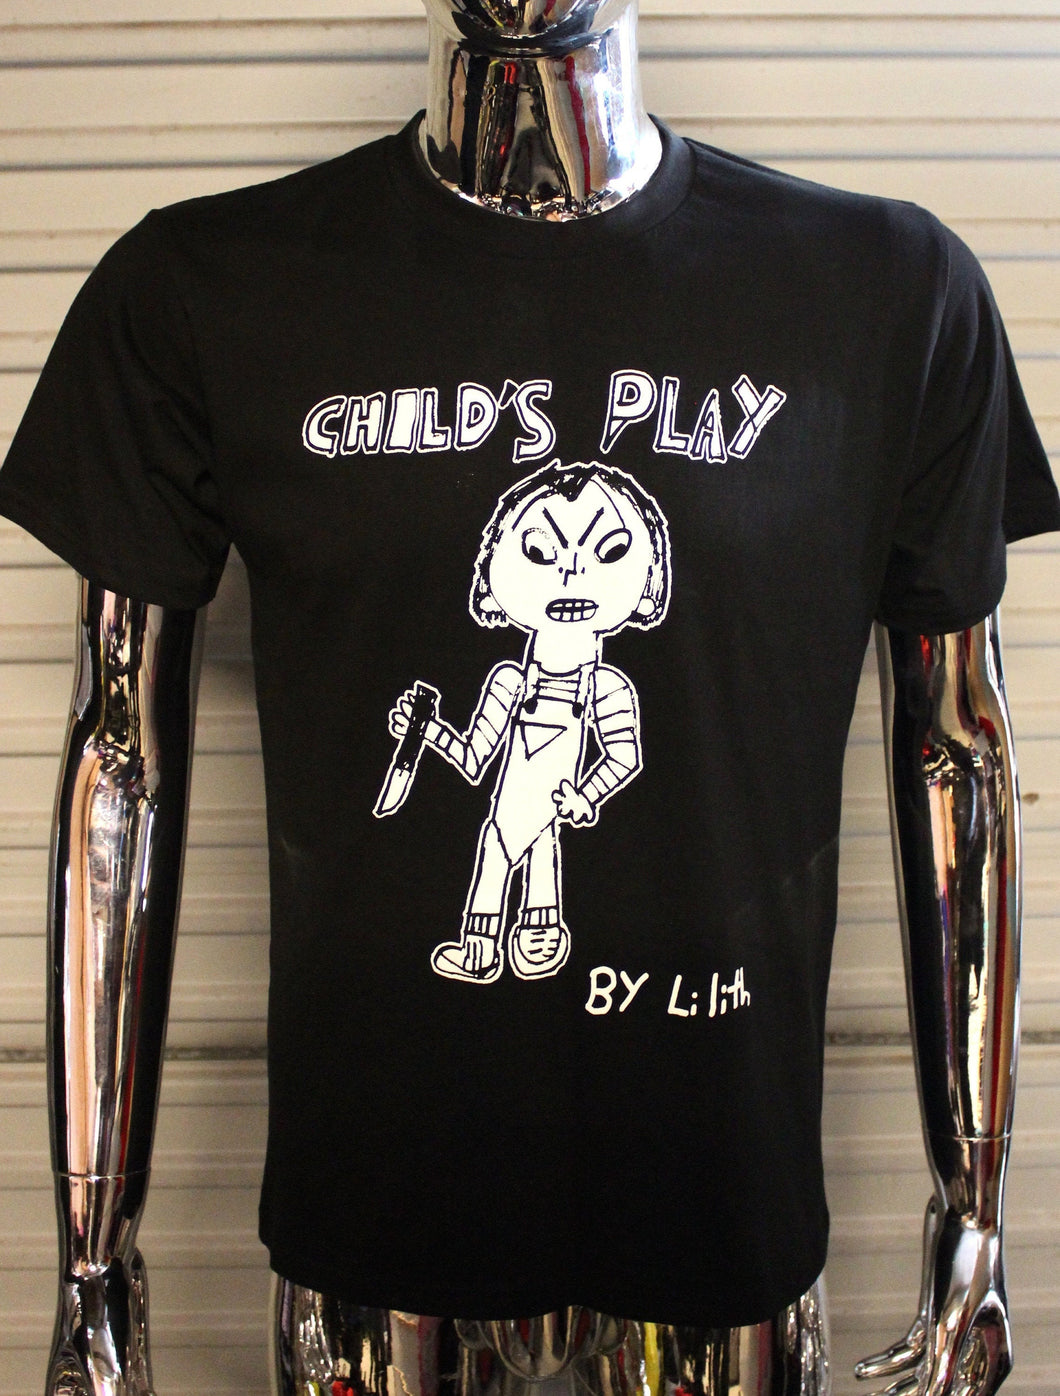 Child's Play by Lilith T-shirt